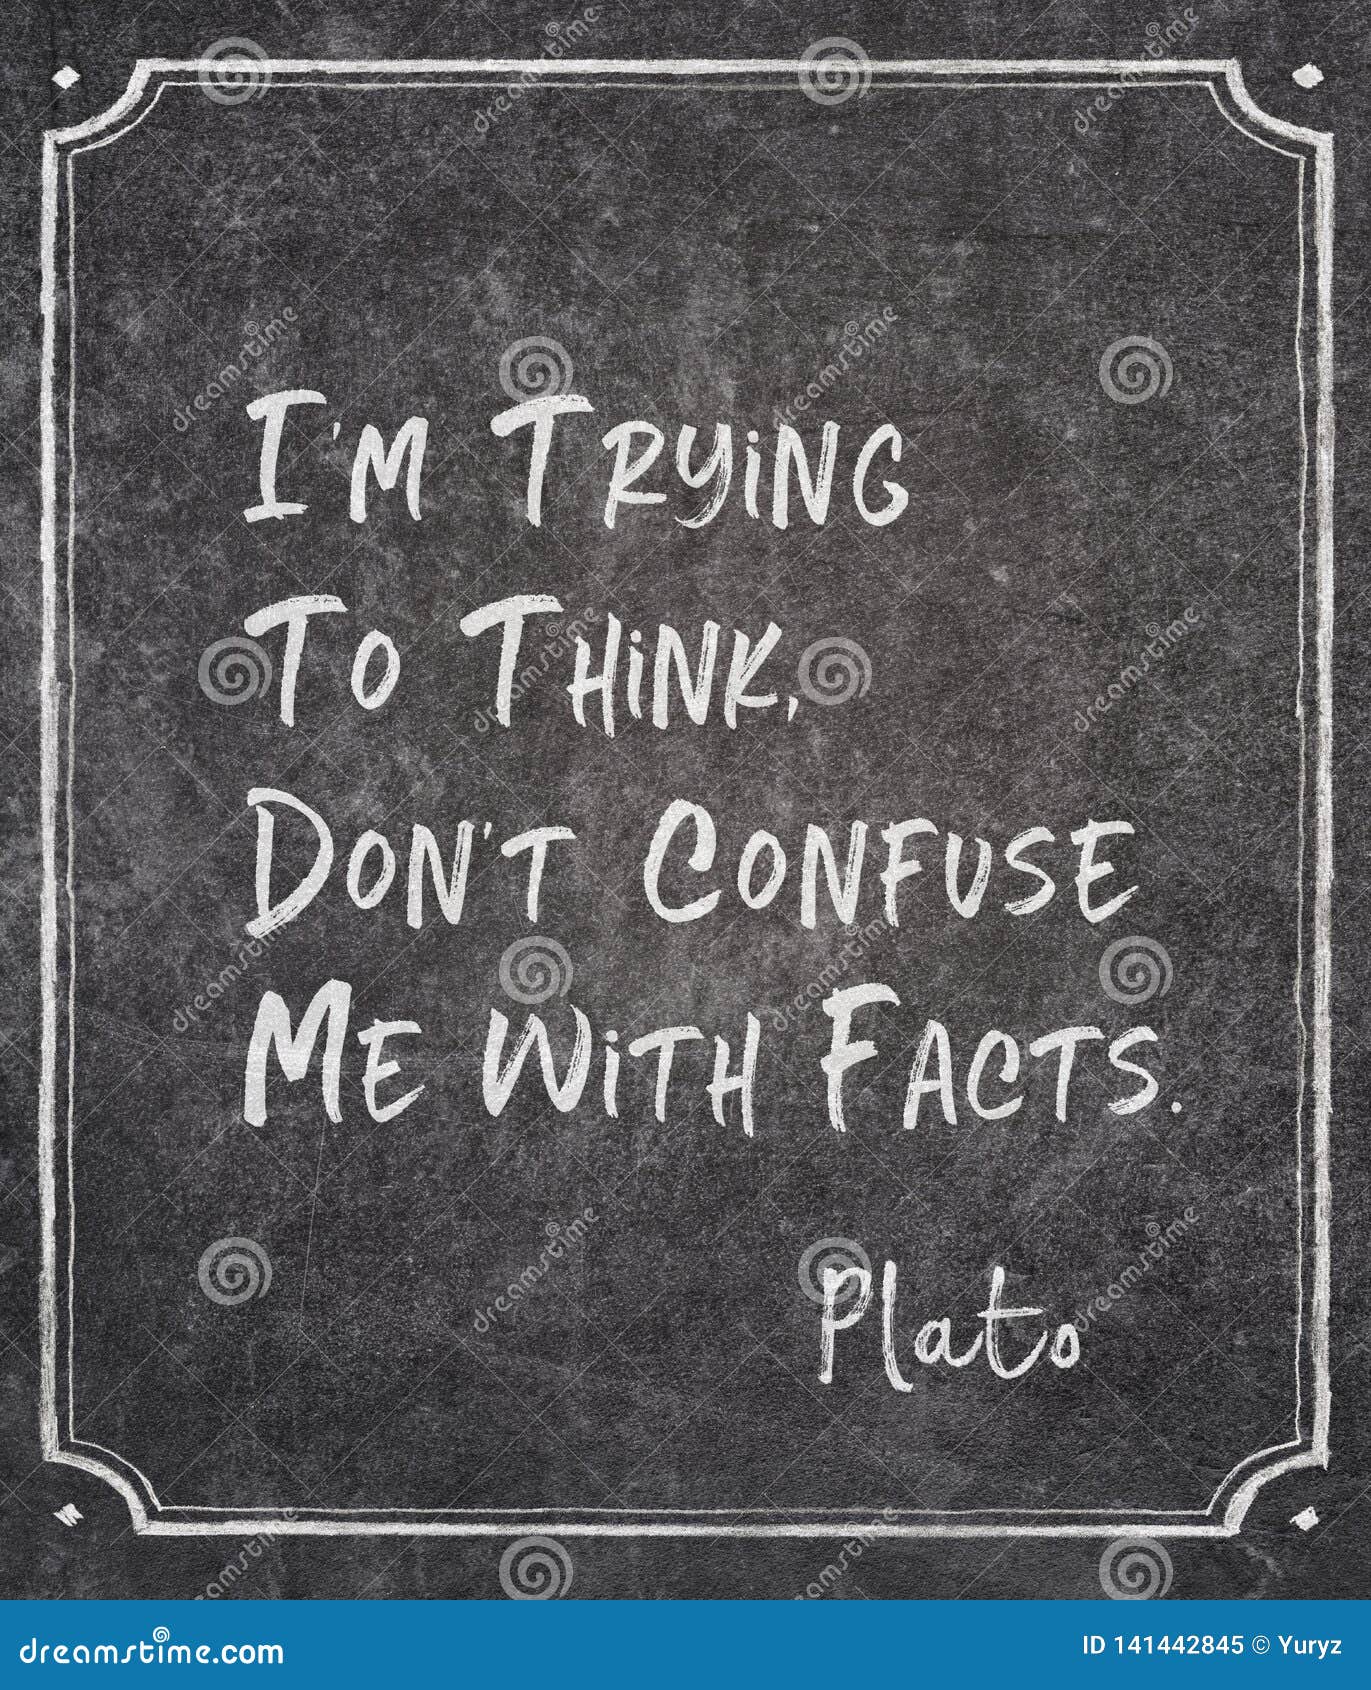 with facts plato quote